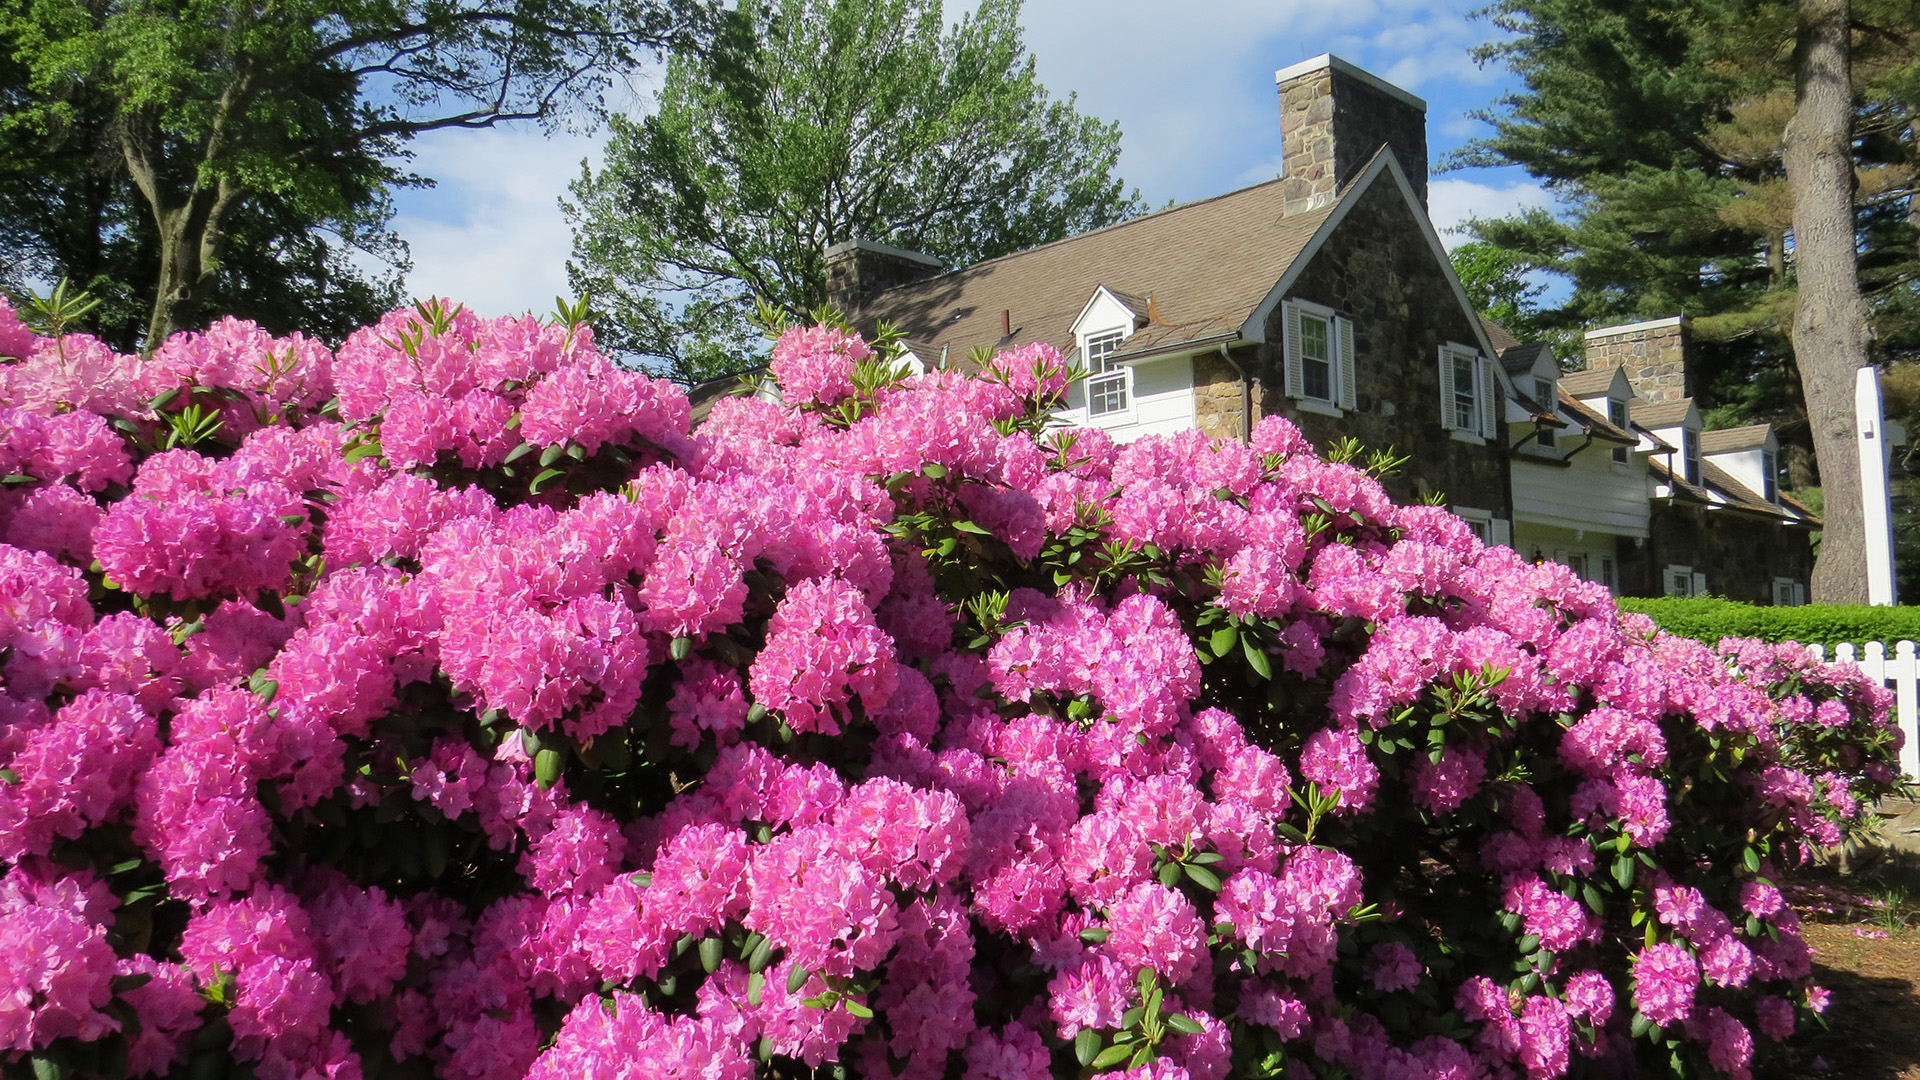 Glenhill Farmhouse Rhododendrons